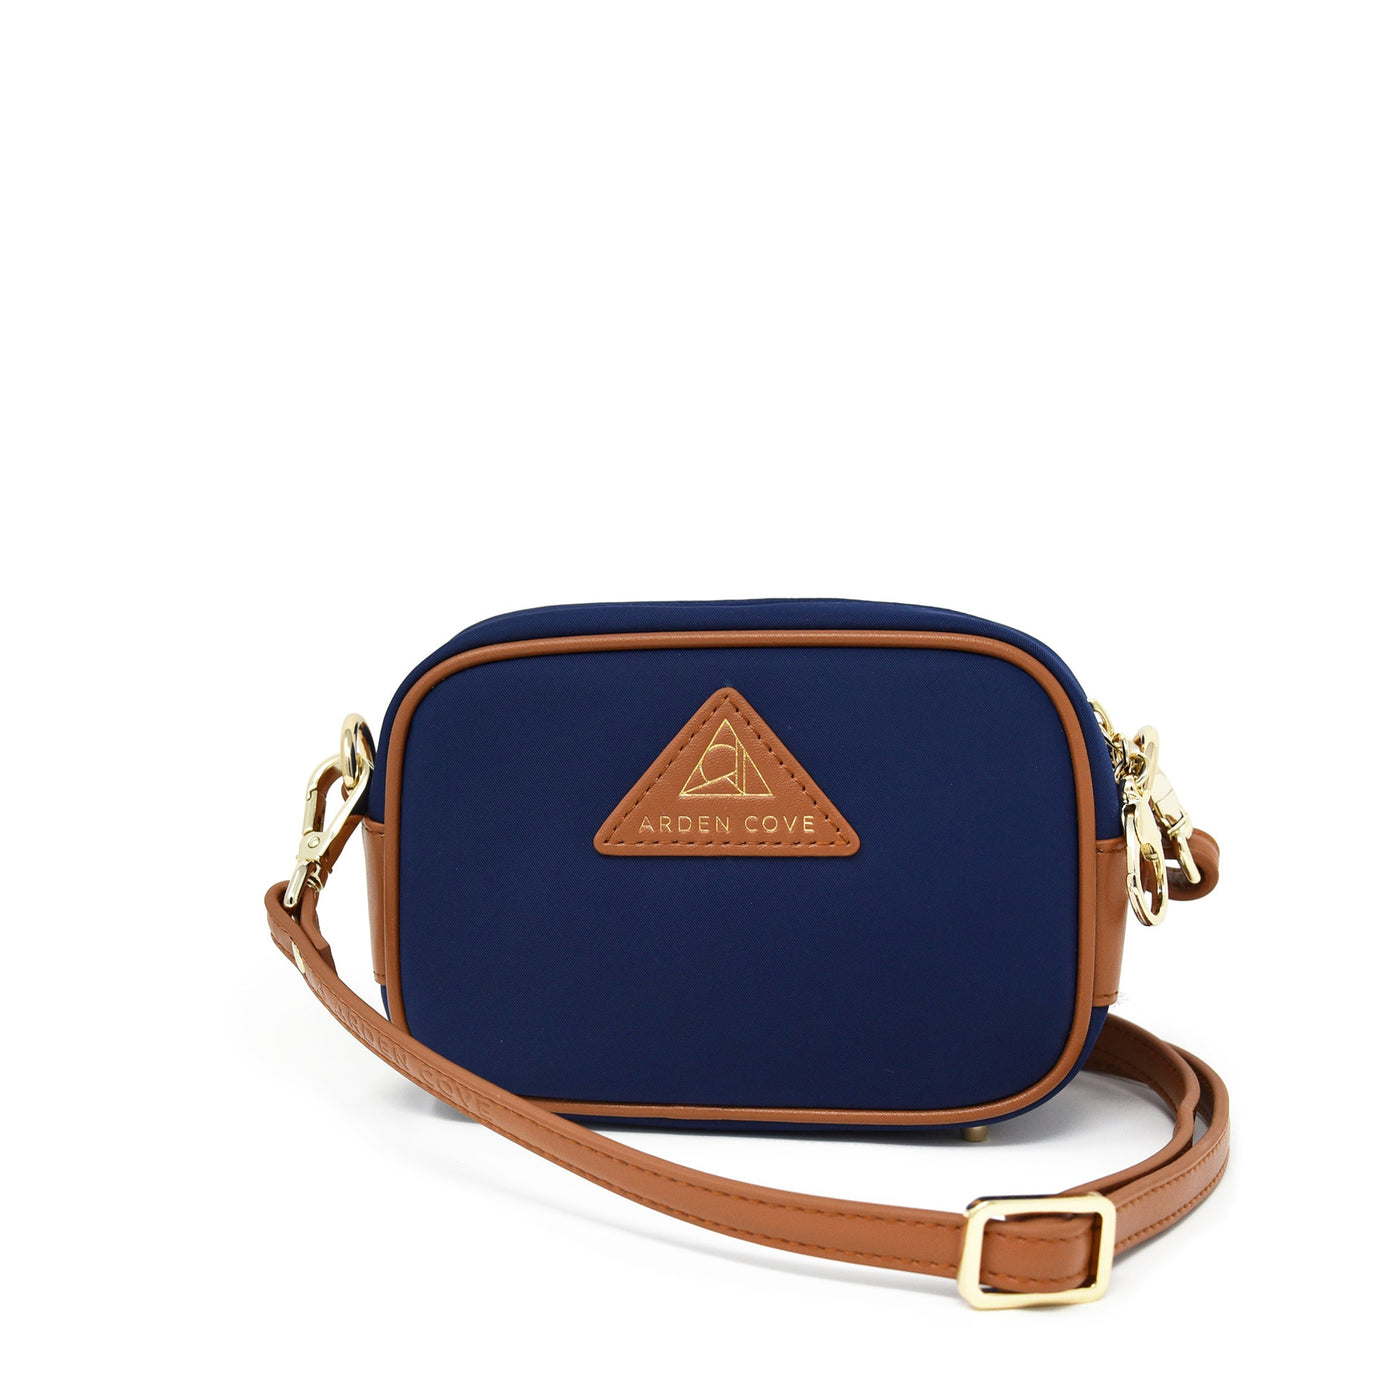 Anti-theft Water-resistant Travel Crossbody - Crissy Mini Crossbody in Navy Gold with slash-resistant faux leather & classic clasps straps - front view - Arden Cove